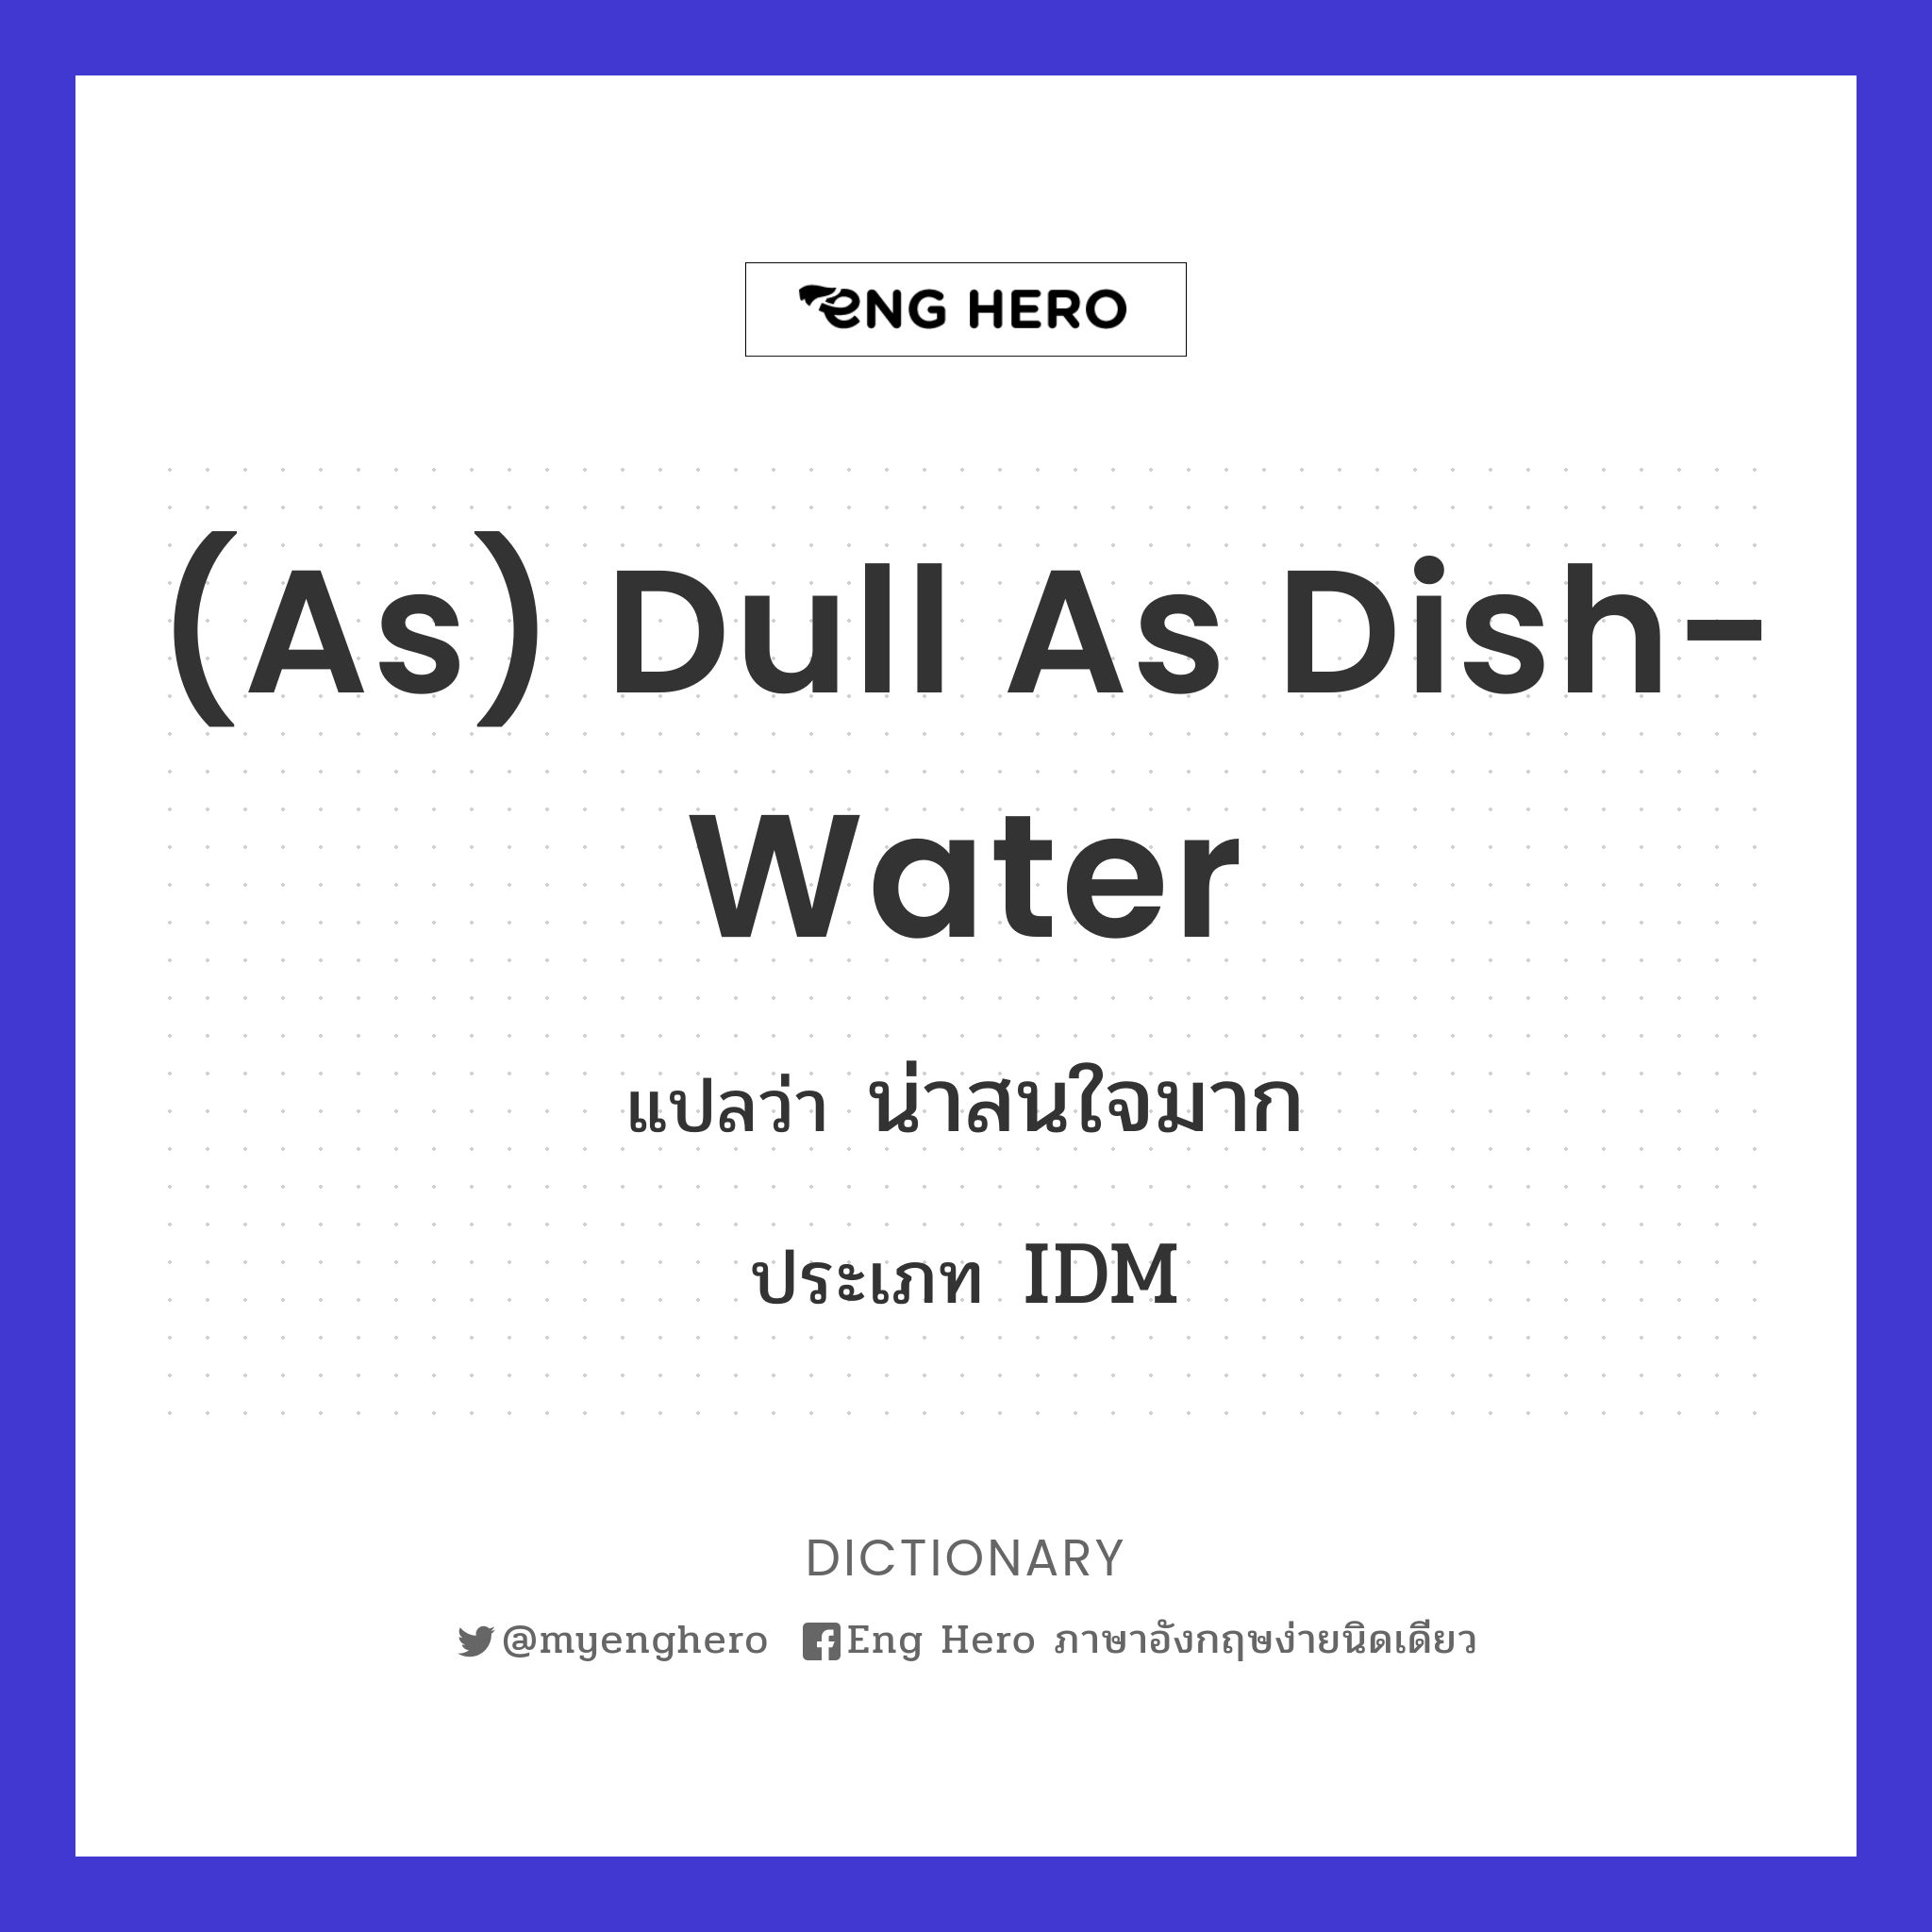 (as) dull as dish-water